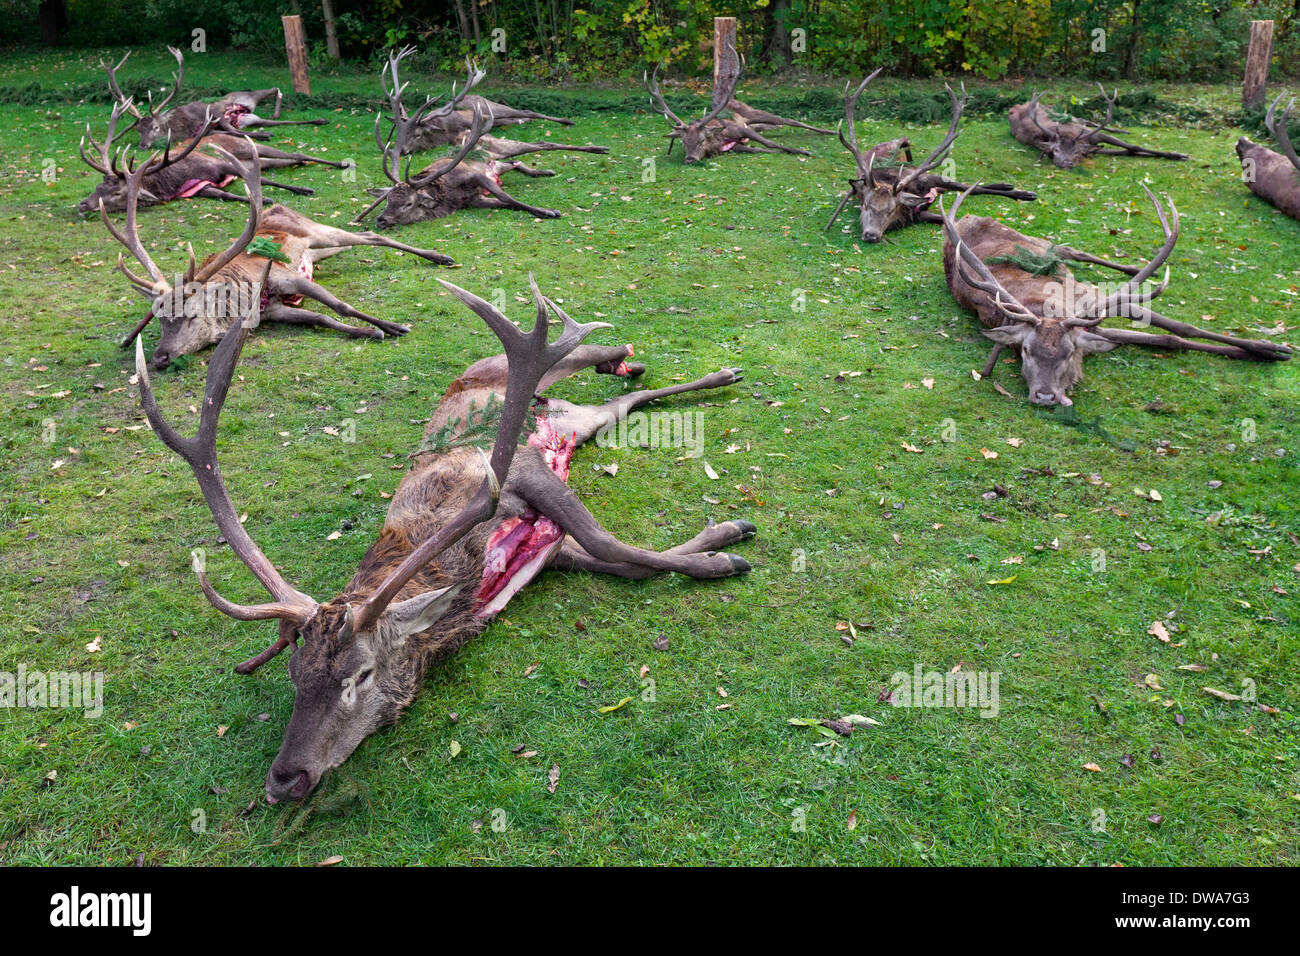 Harvest of dead Red Deer (Cervus elaphus) stags shot and gutted by hunters after the hunt during the hunting season in autumn Stock Photo